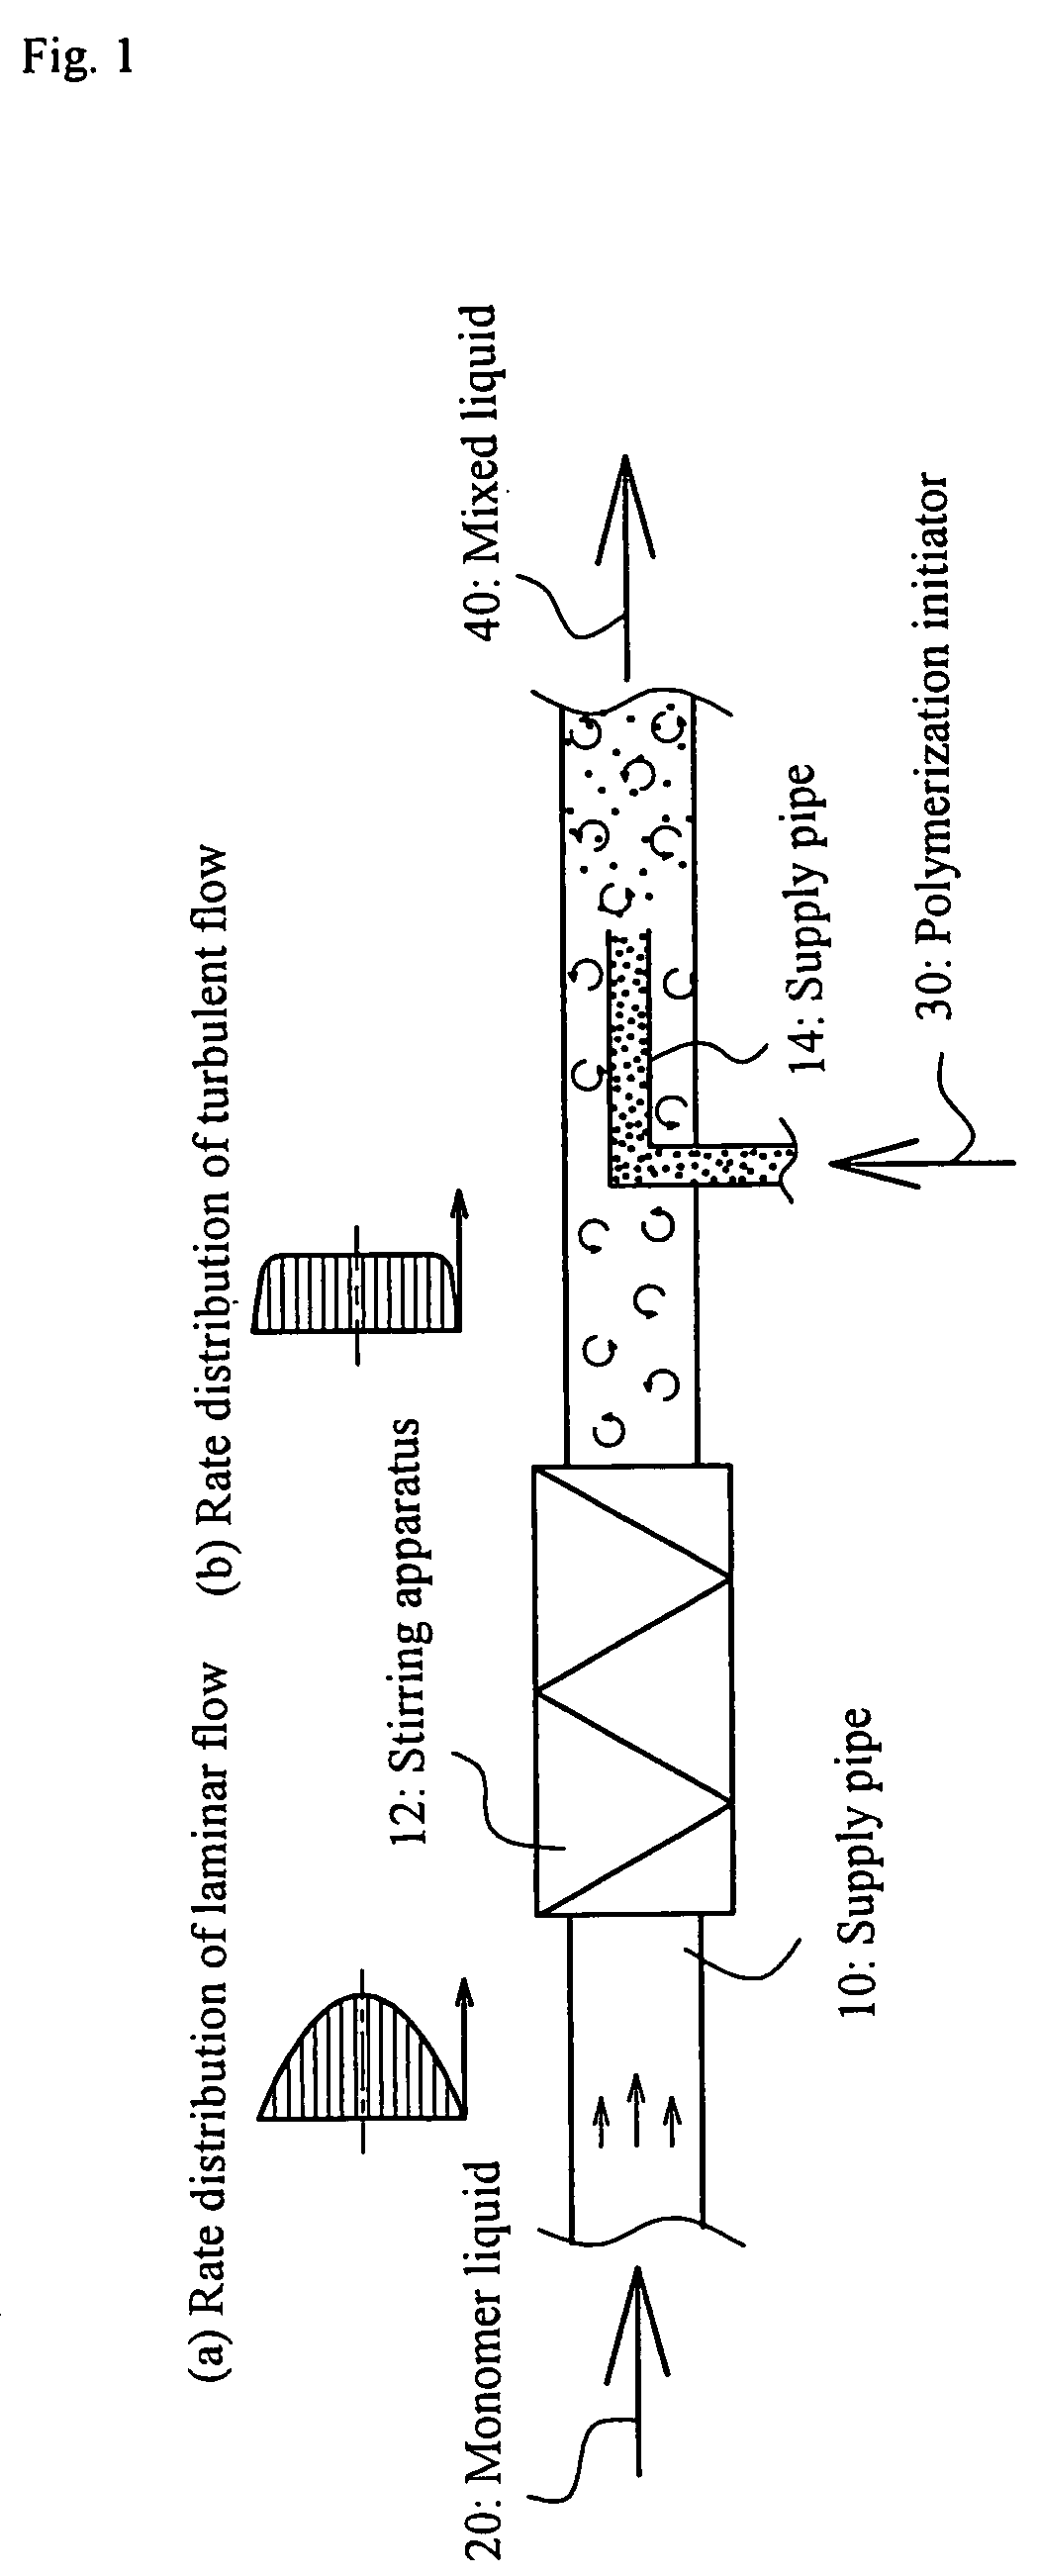 Process and apparatus for production of water-absorbent resin